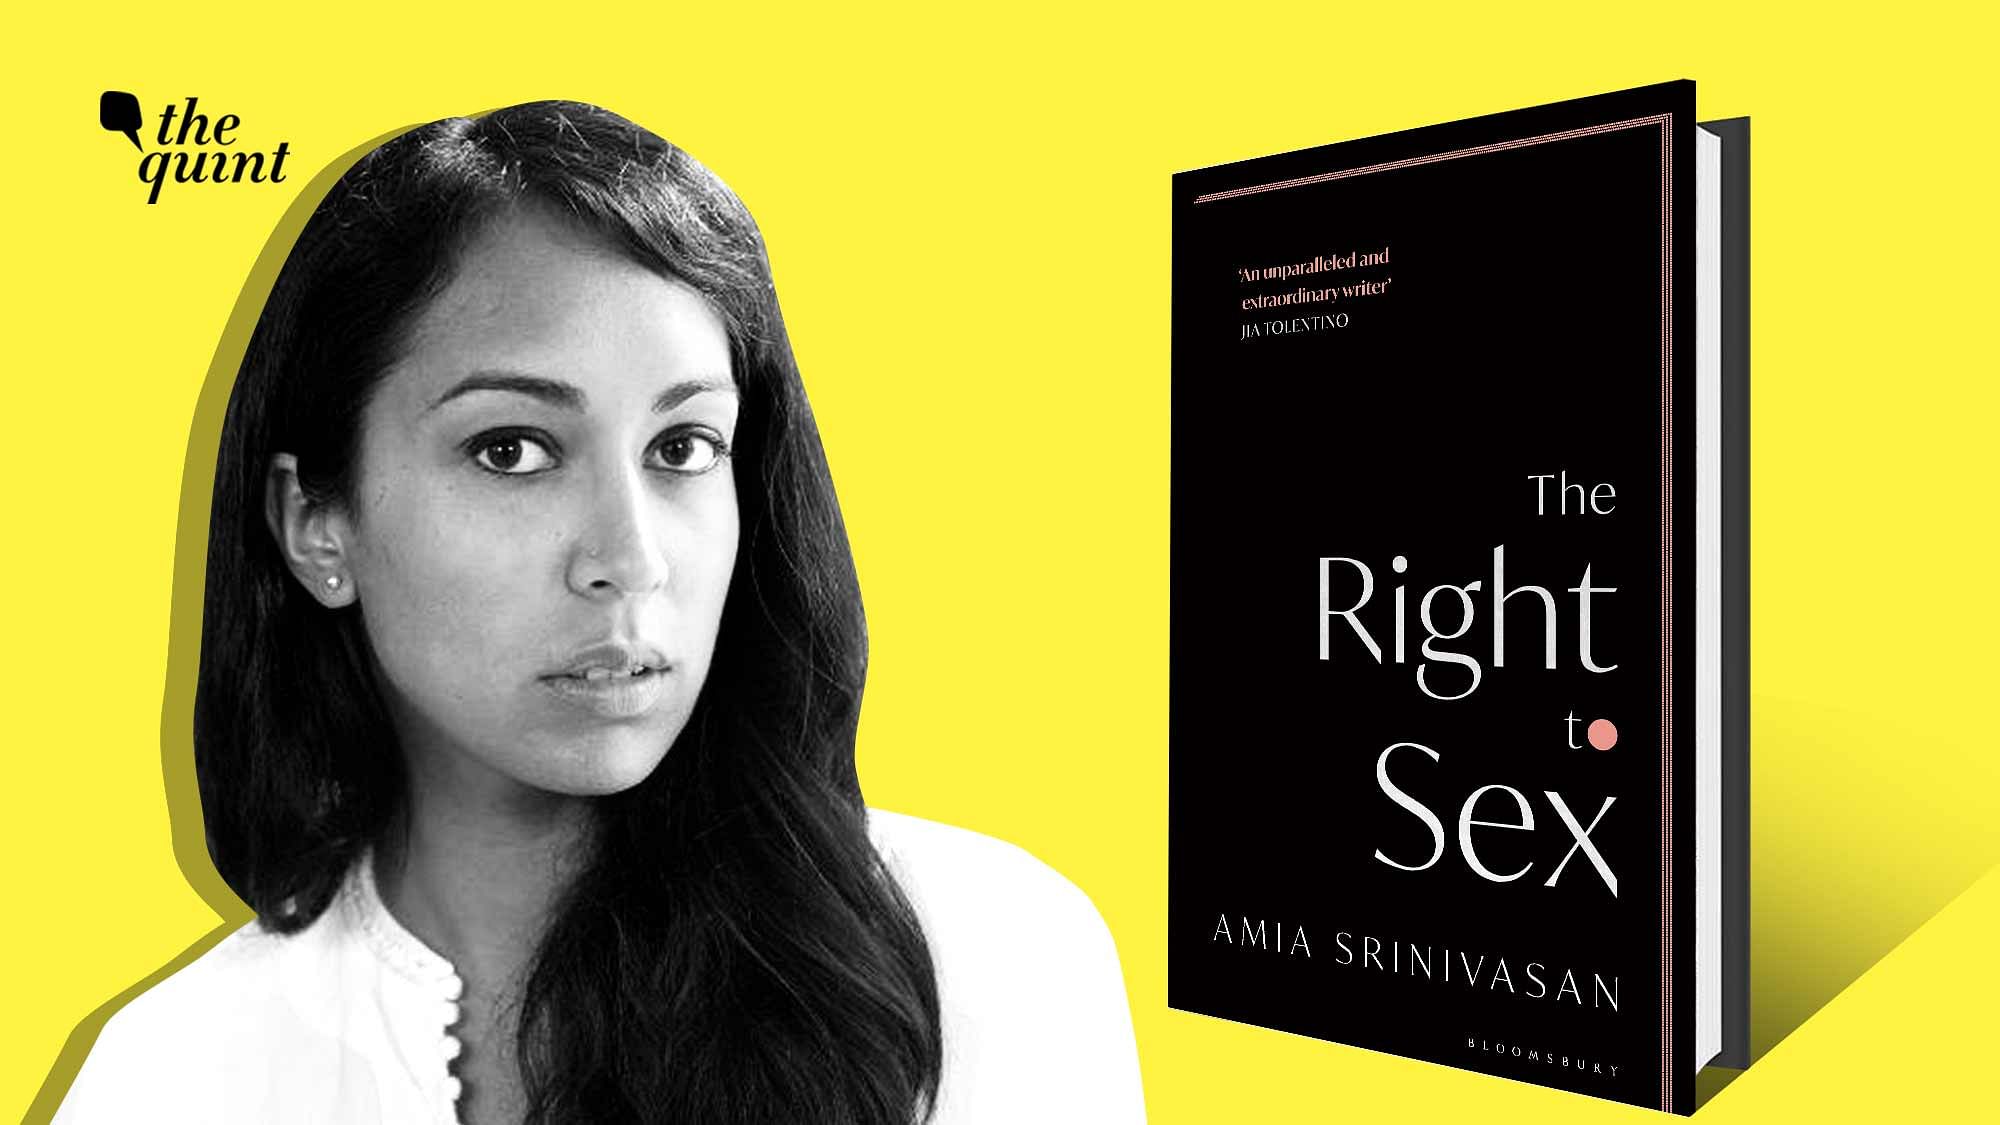 <div class="paragraphs"><p>Book Excerpt: 'The Right to Sex' by Amia Srinivasan</p></div>